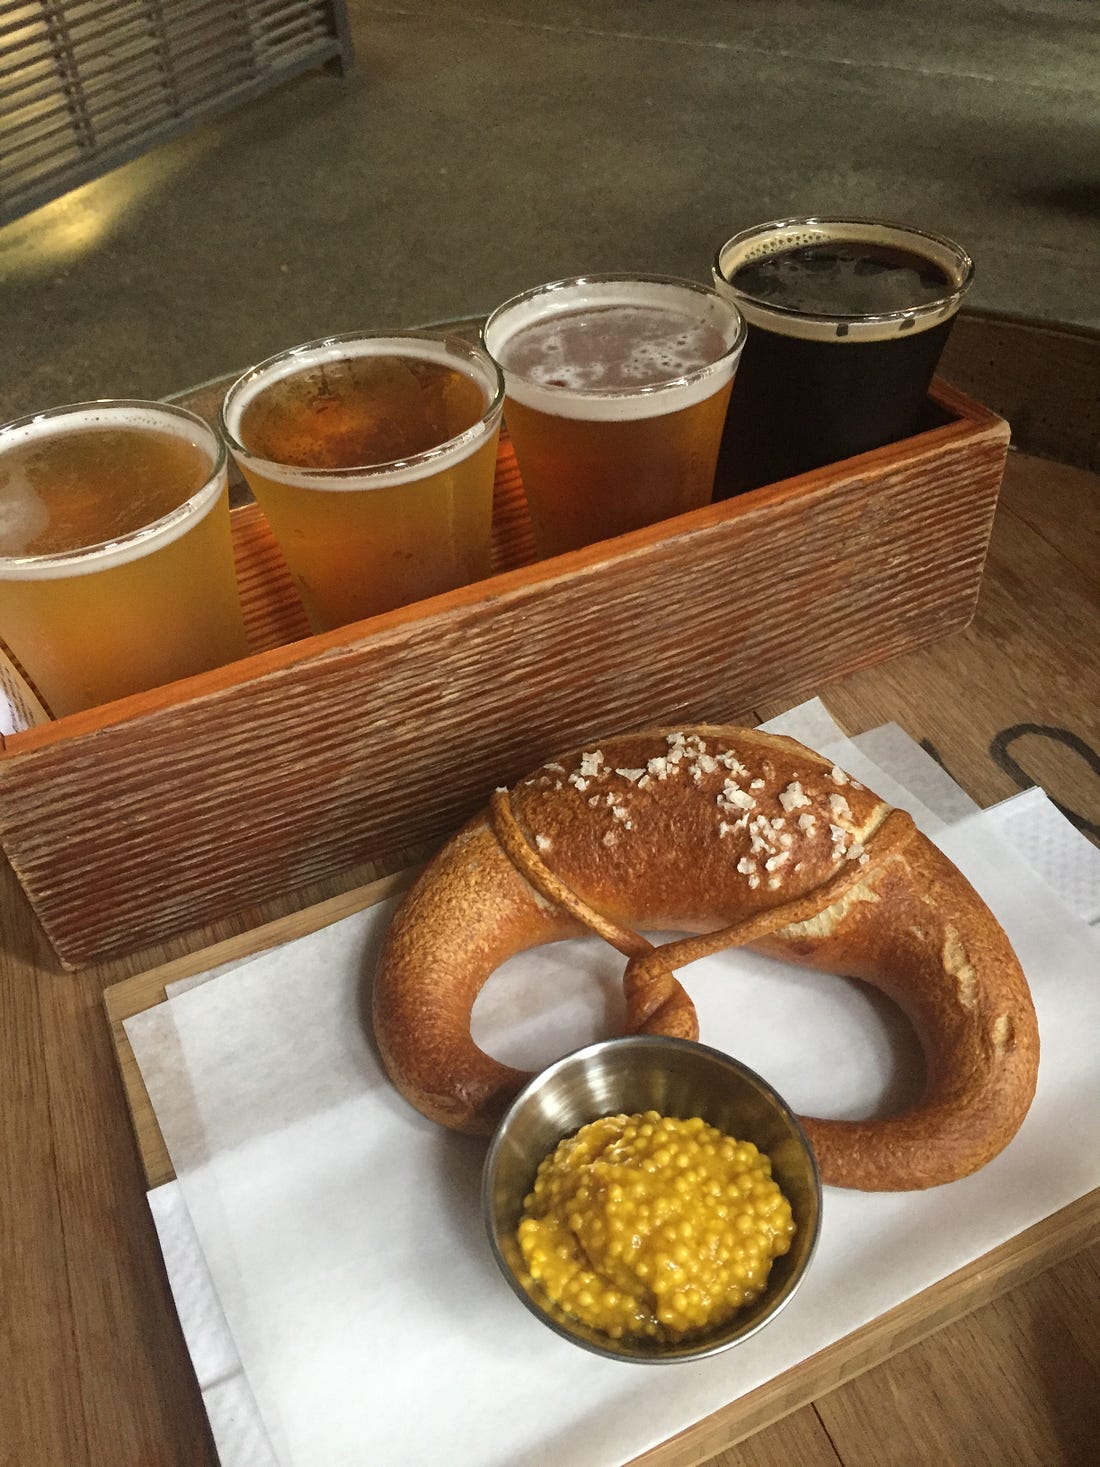 a flight of four beers in a wooden box, with the lightest at the left and a dark stout at the right. In front of them is a twisted soft pretzel with big salt flakes, and a ramekin full of grainy mustard.